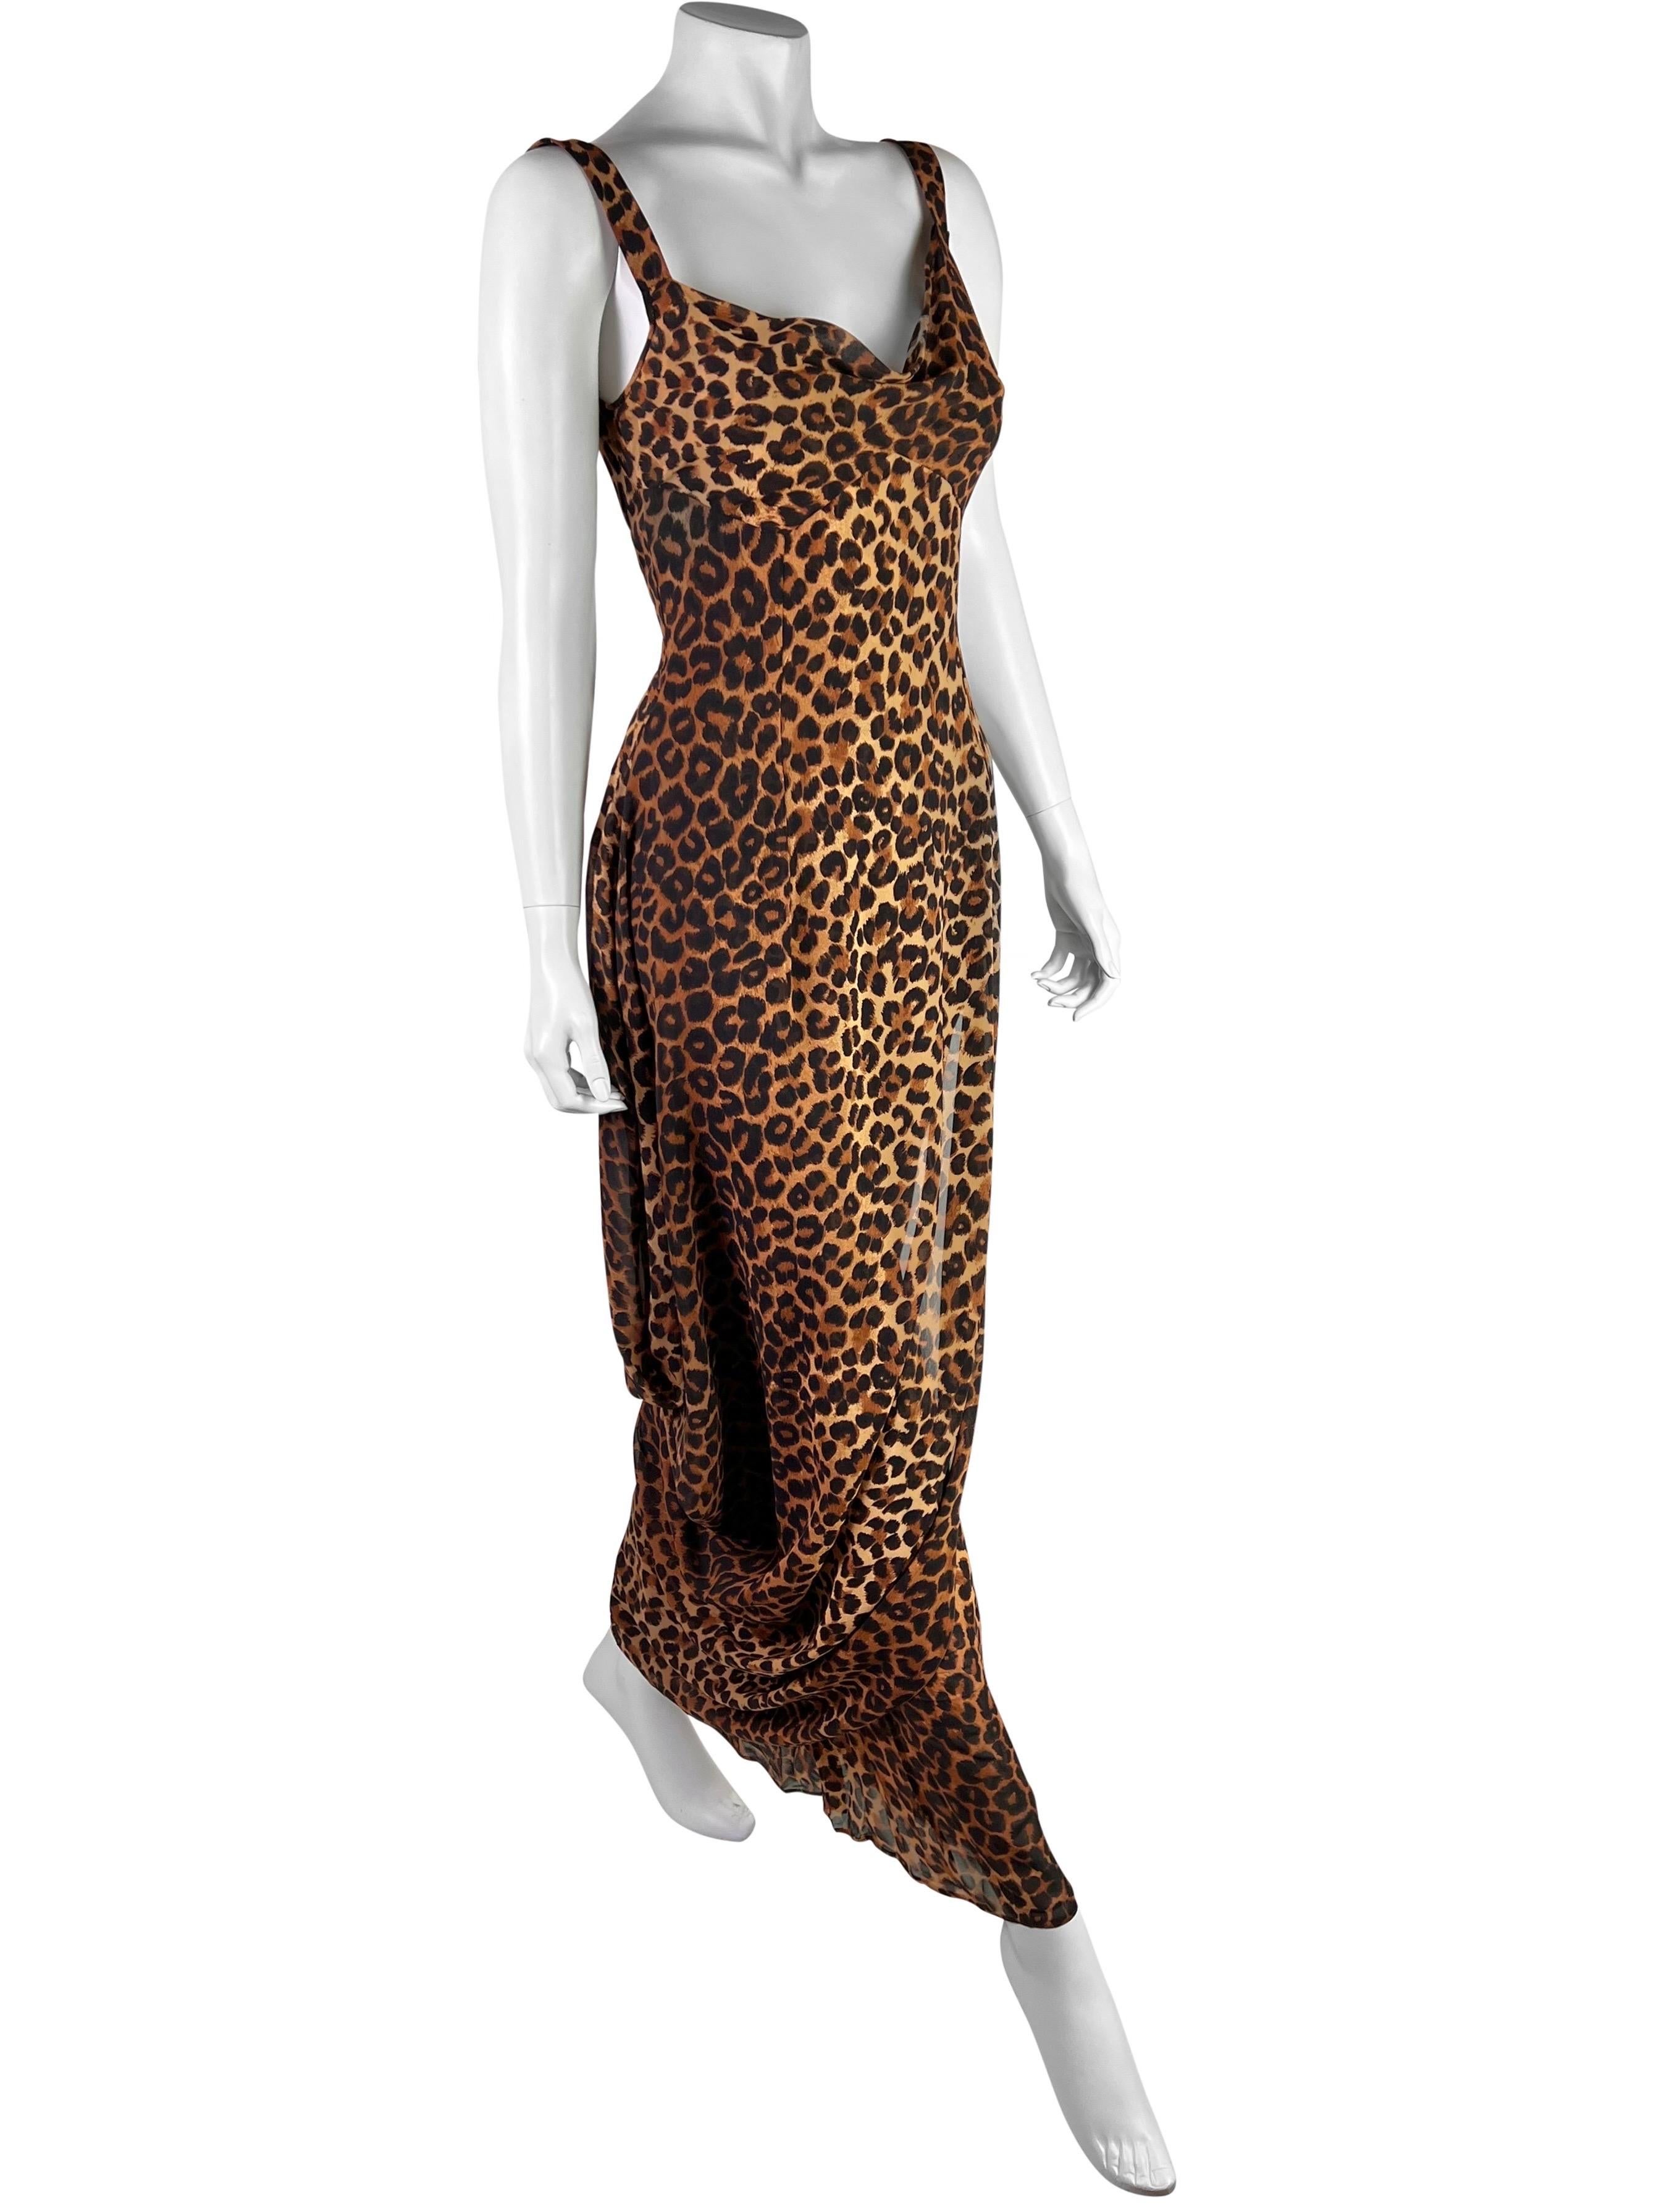 A stunning leopard dress by John Galliano with a signature side draping on the skirt, stunning cowl neck a row of handmade buttons on the side. 

Size FR 40, fits like Medium but can be pinched for the Small. 

Measurements (flat lay on one